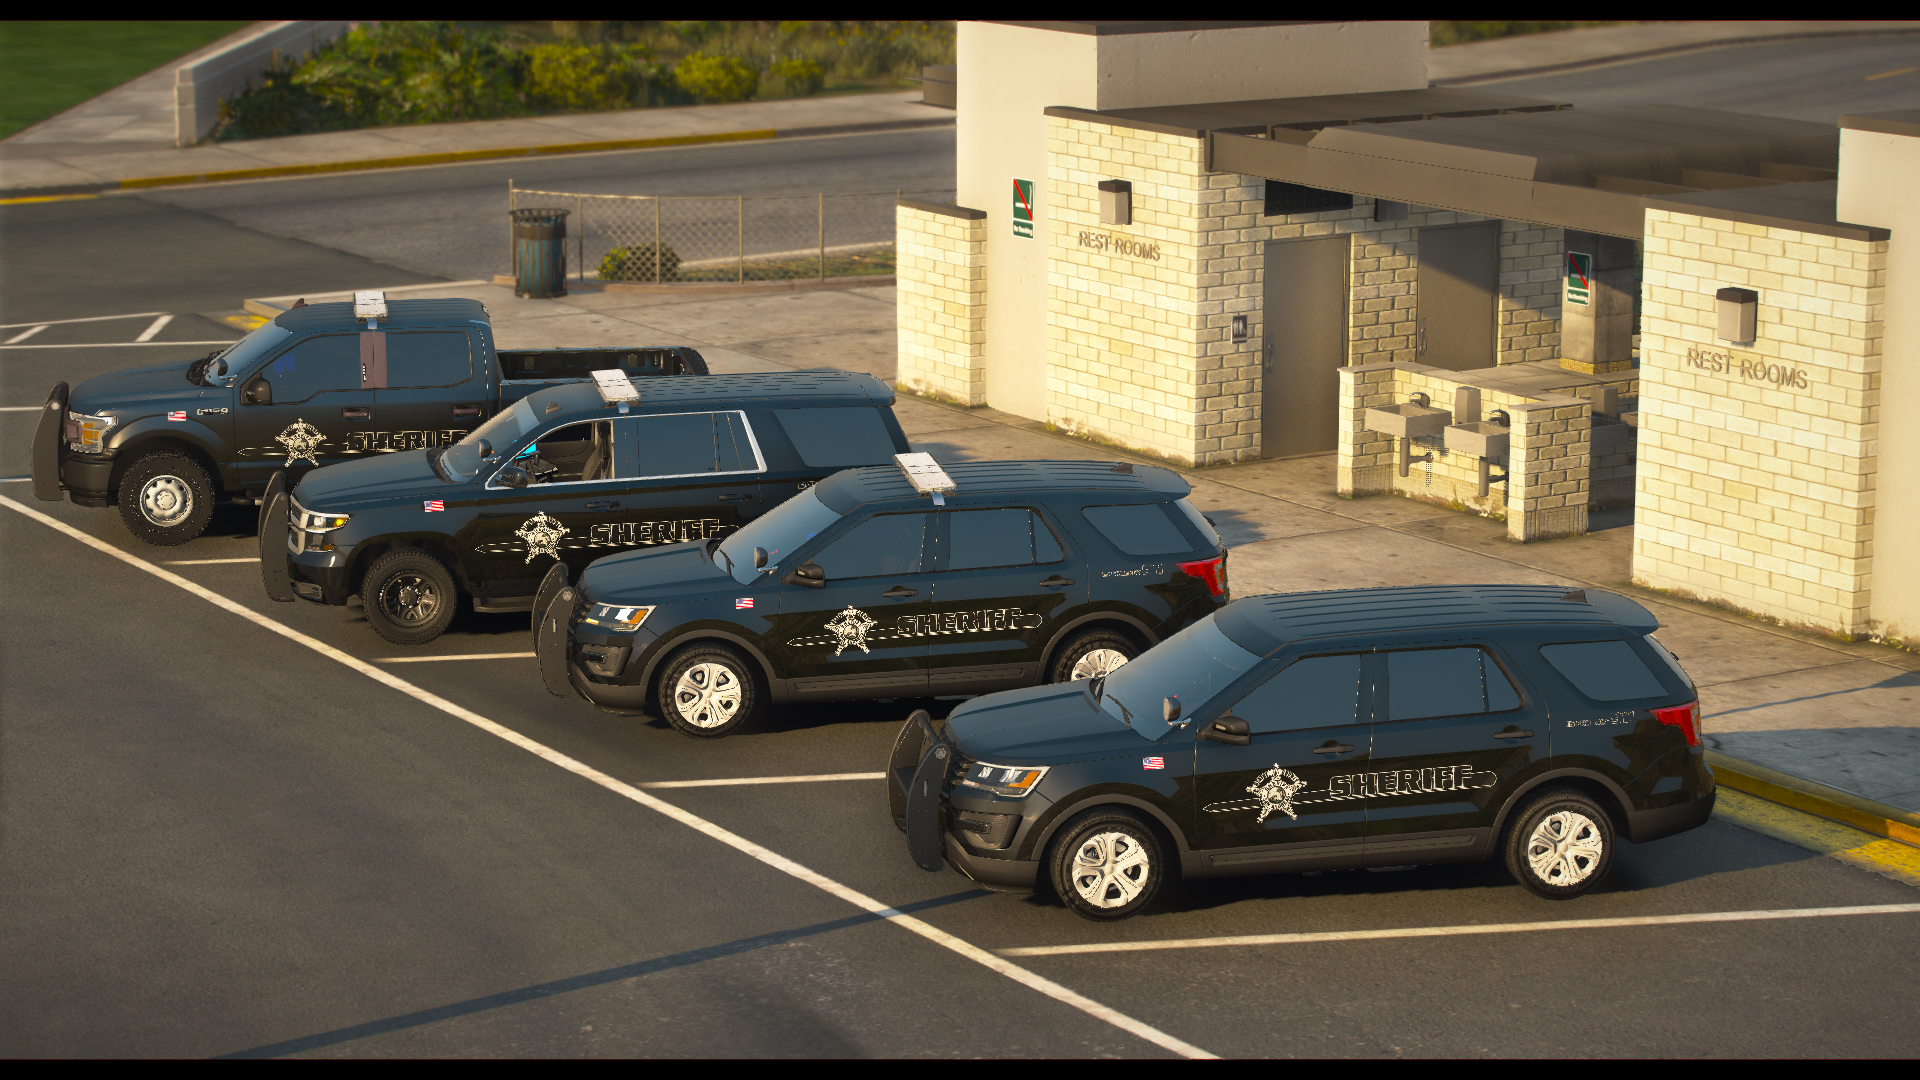 Grand_Theft_Auto_V_Screenshot_2020_08.10_-_00_18_57_93.png.afedce98f16276d0f3eaee6ae67364ce.png